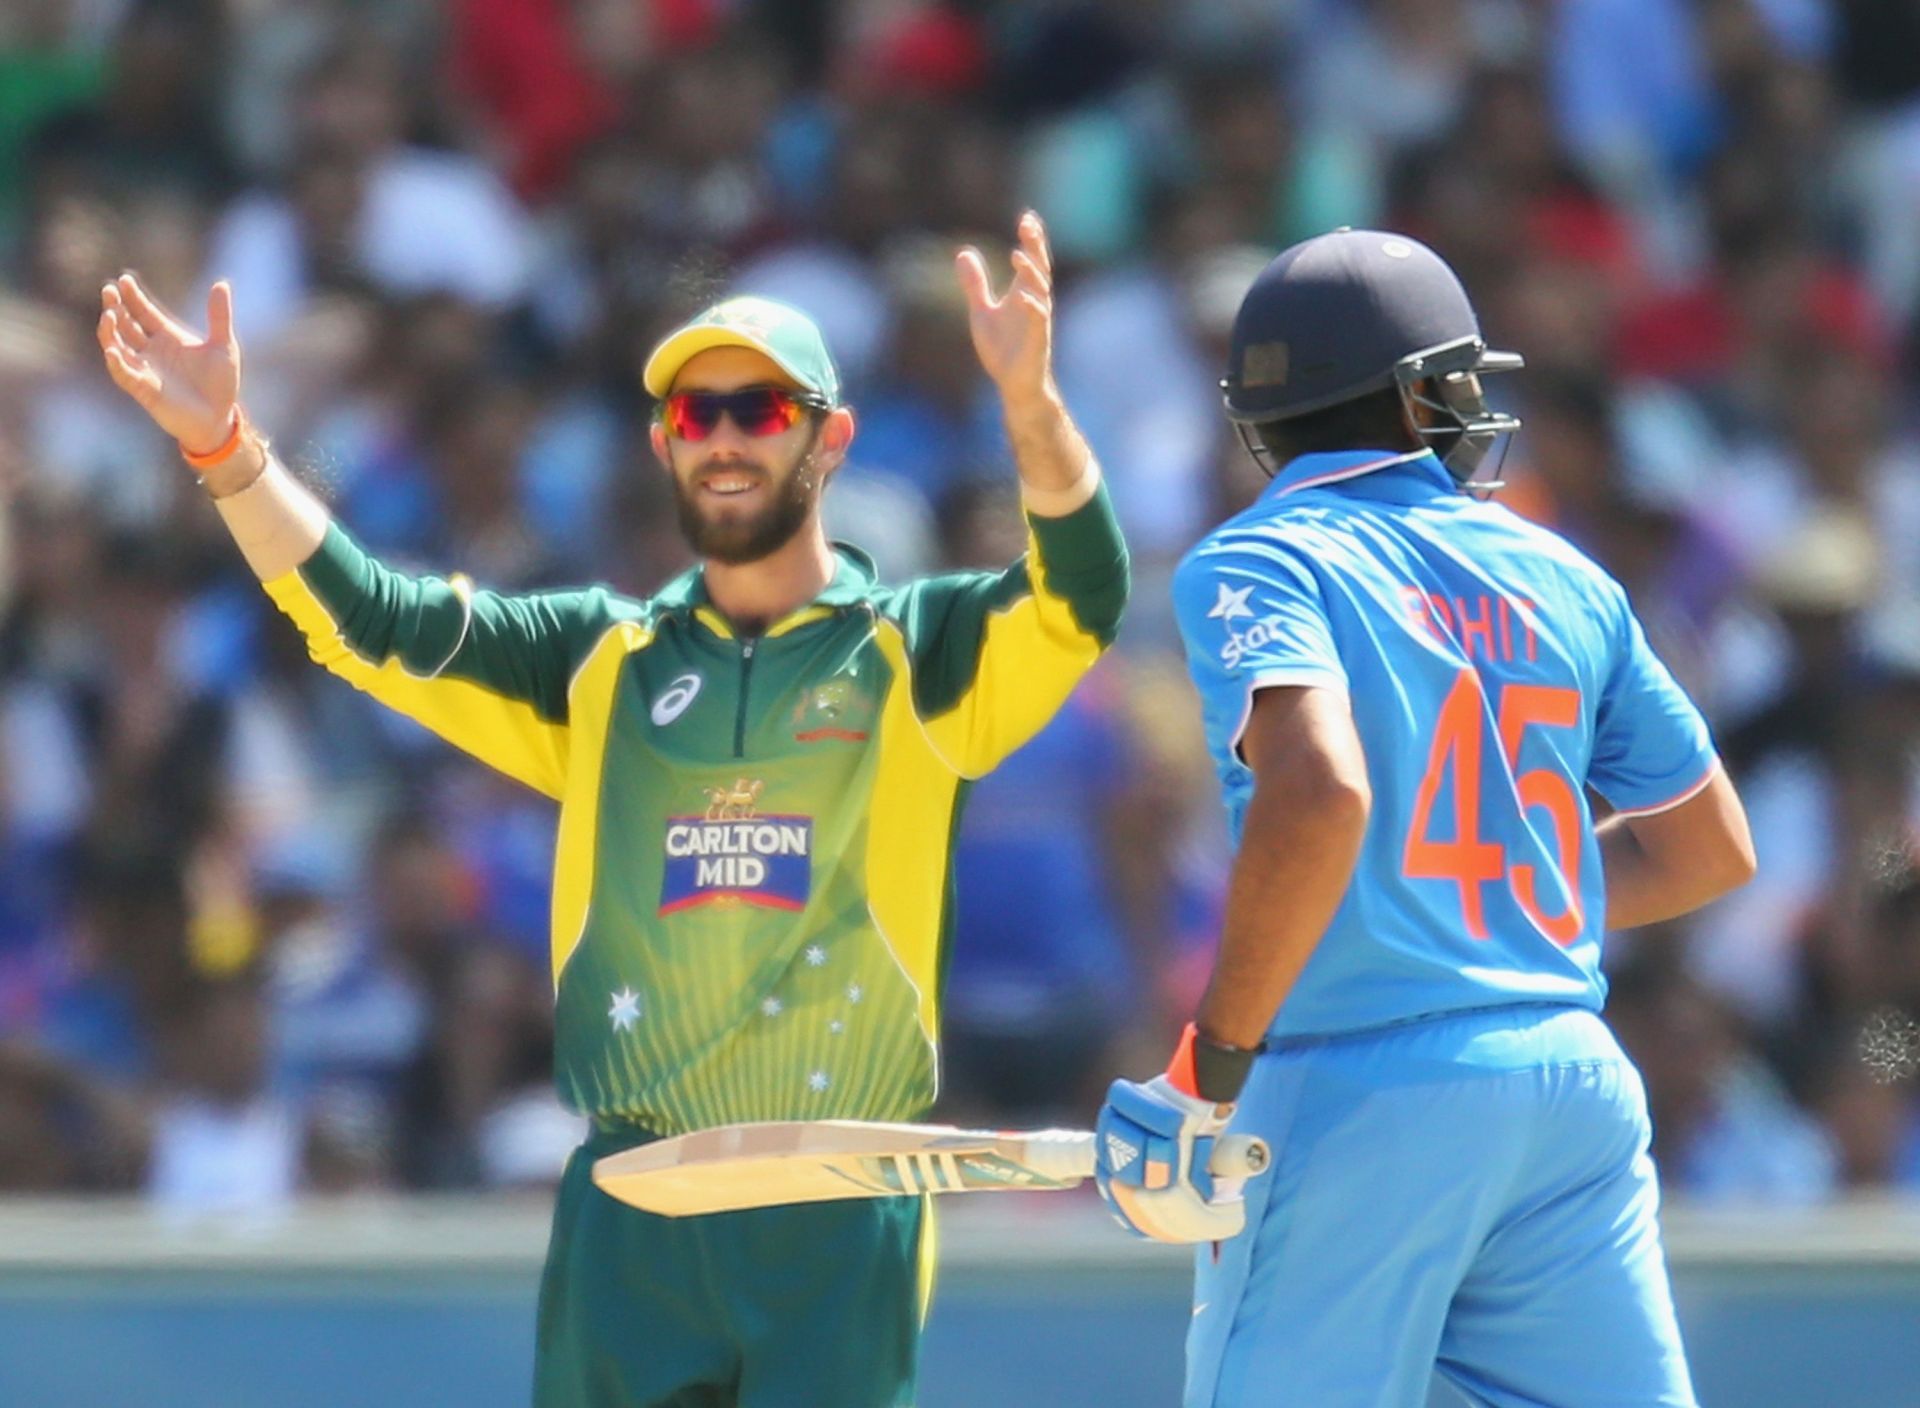 Glenn Maxwell gestures as Rohit Sharma takes a run during an ODI at the MCG in January 2015. Pic: Getty Images